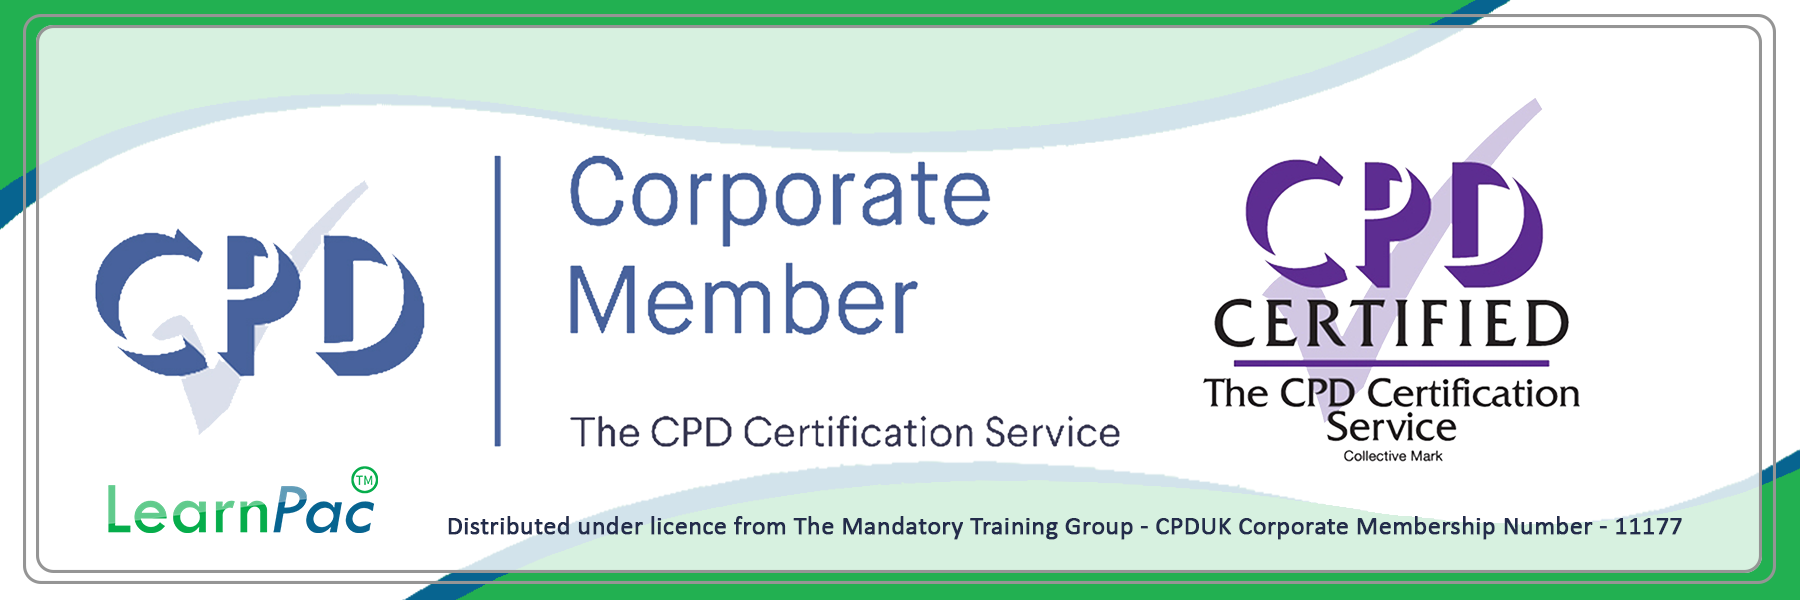 Prevention and Control for Volunteers - Online Course - CPD Certified - Learnpac System UK -